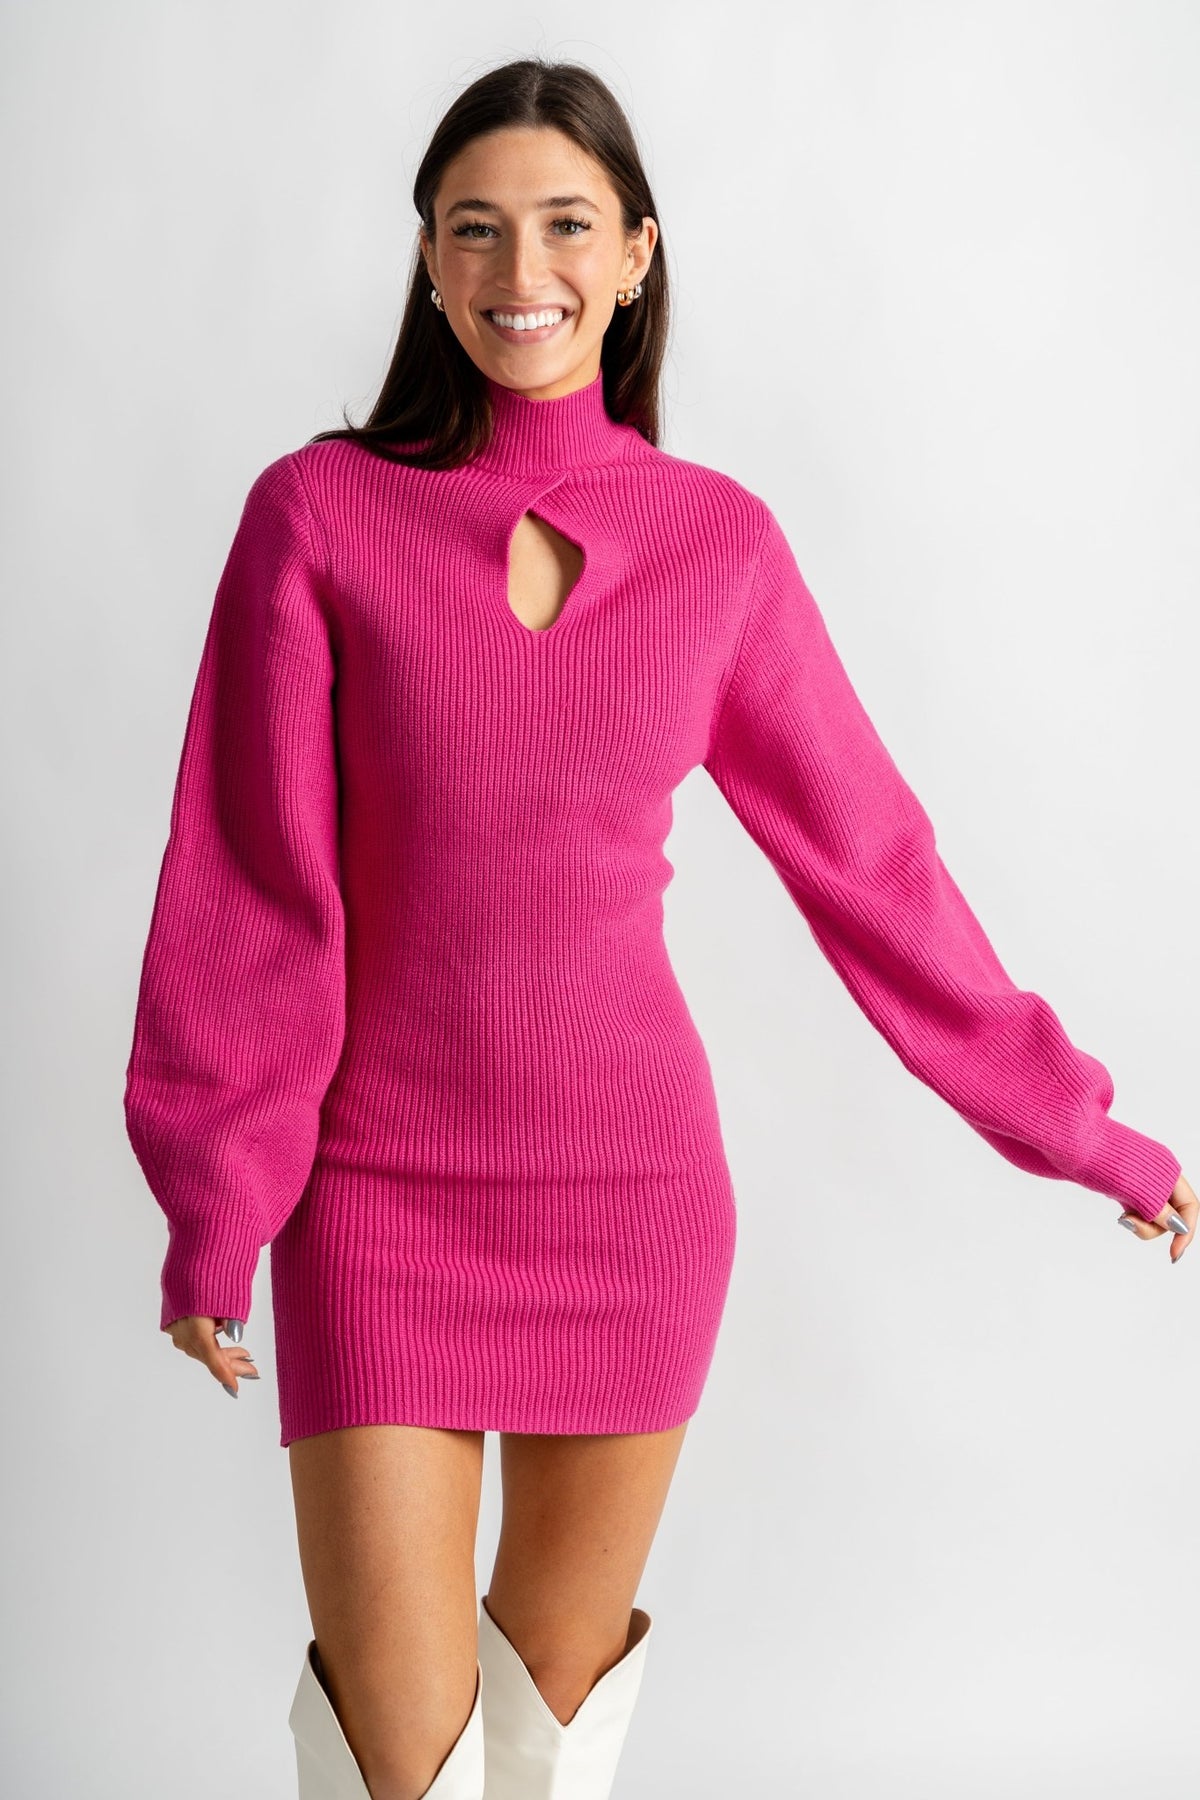 High neck mini dress magenta pink - Trendy T-Shirts for Valentine's Day at Lush Fashion Lounge Boutique in Oklahoma City